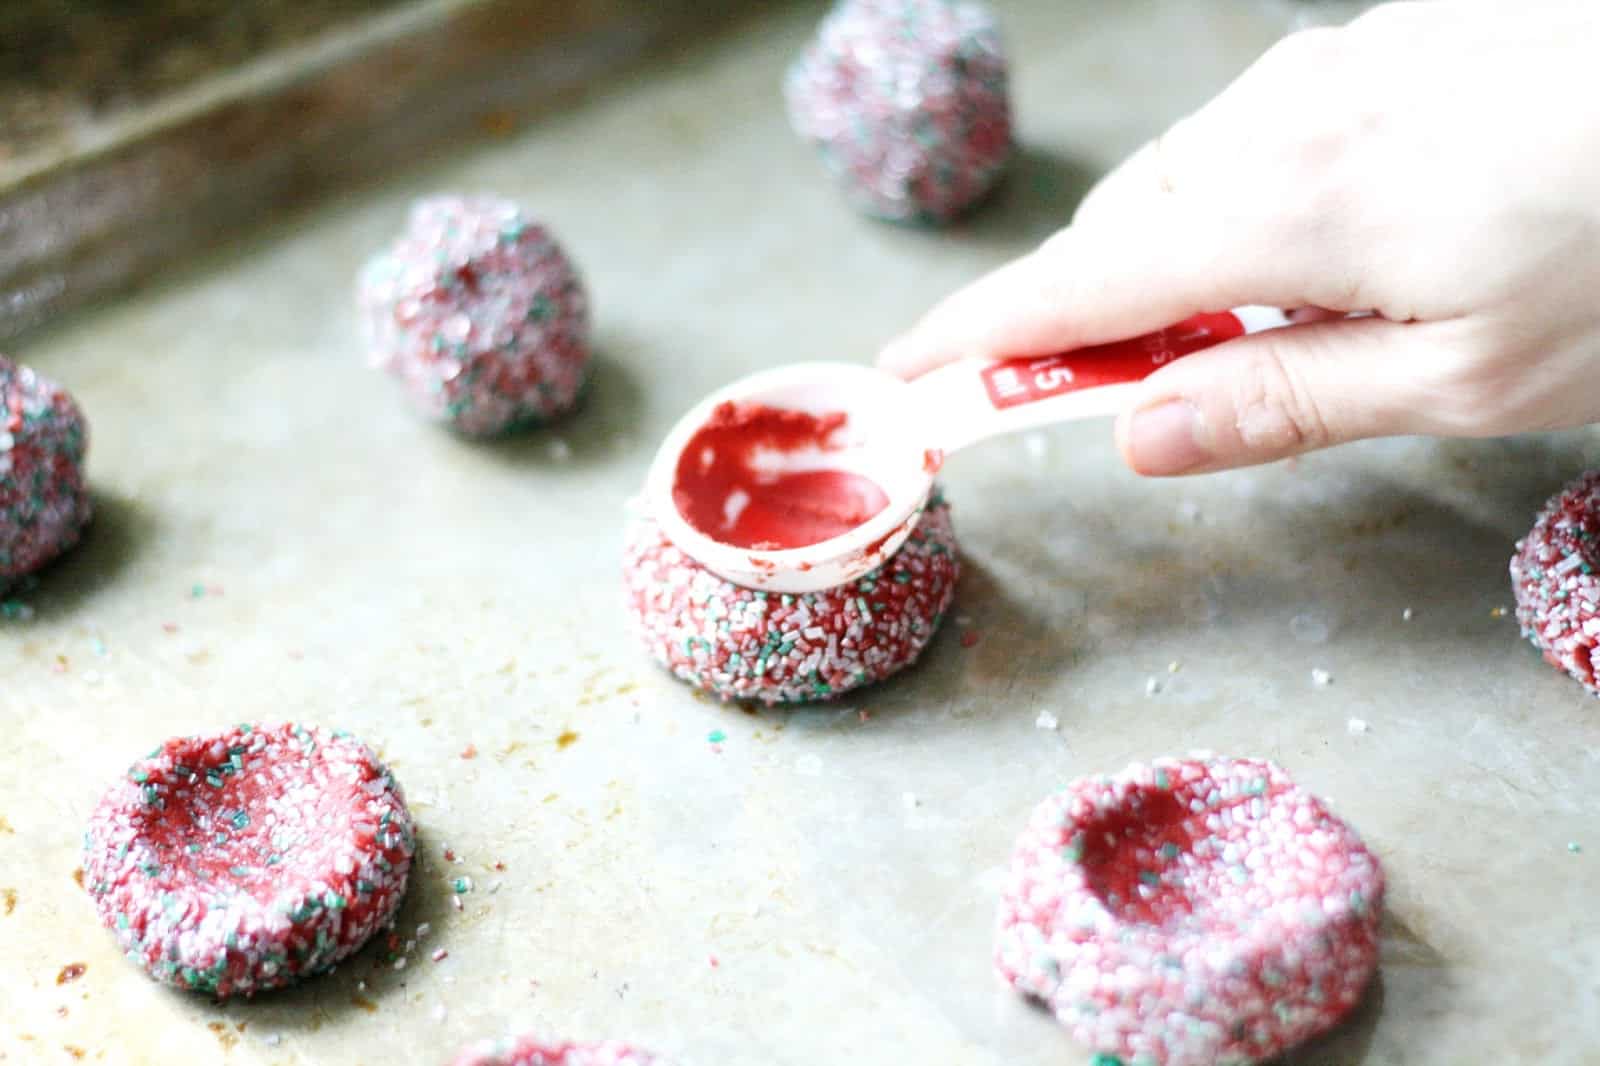 Making the thumbprint in some red velvet cookies